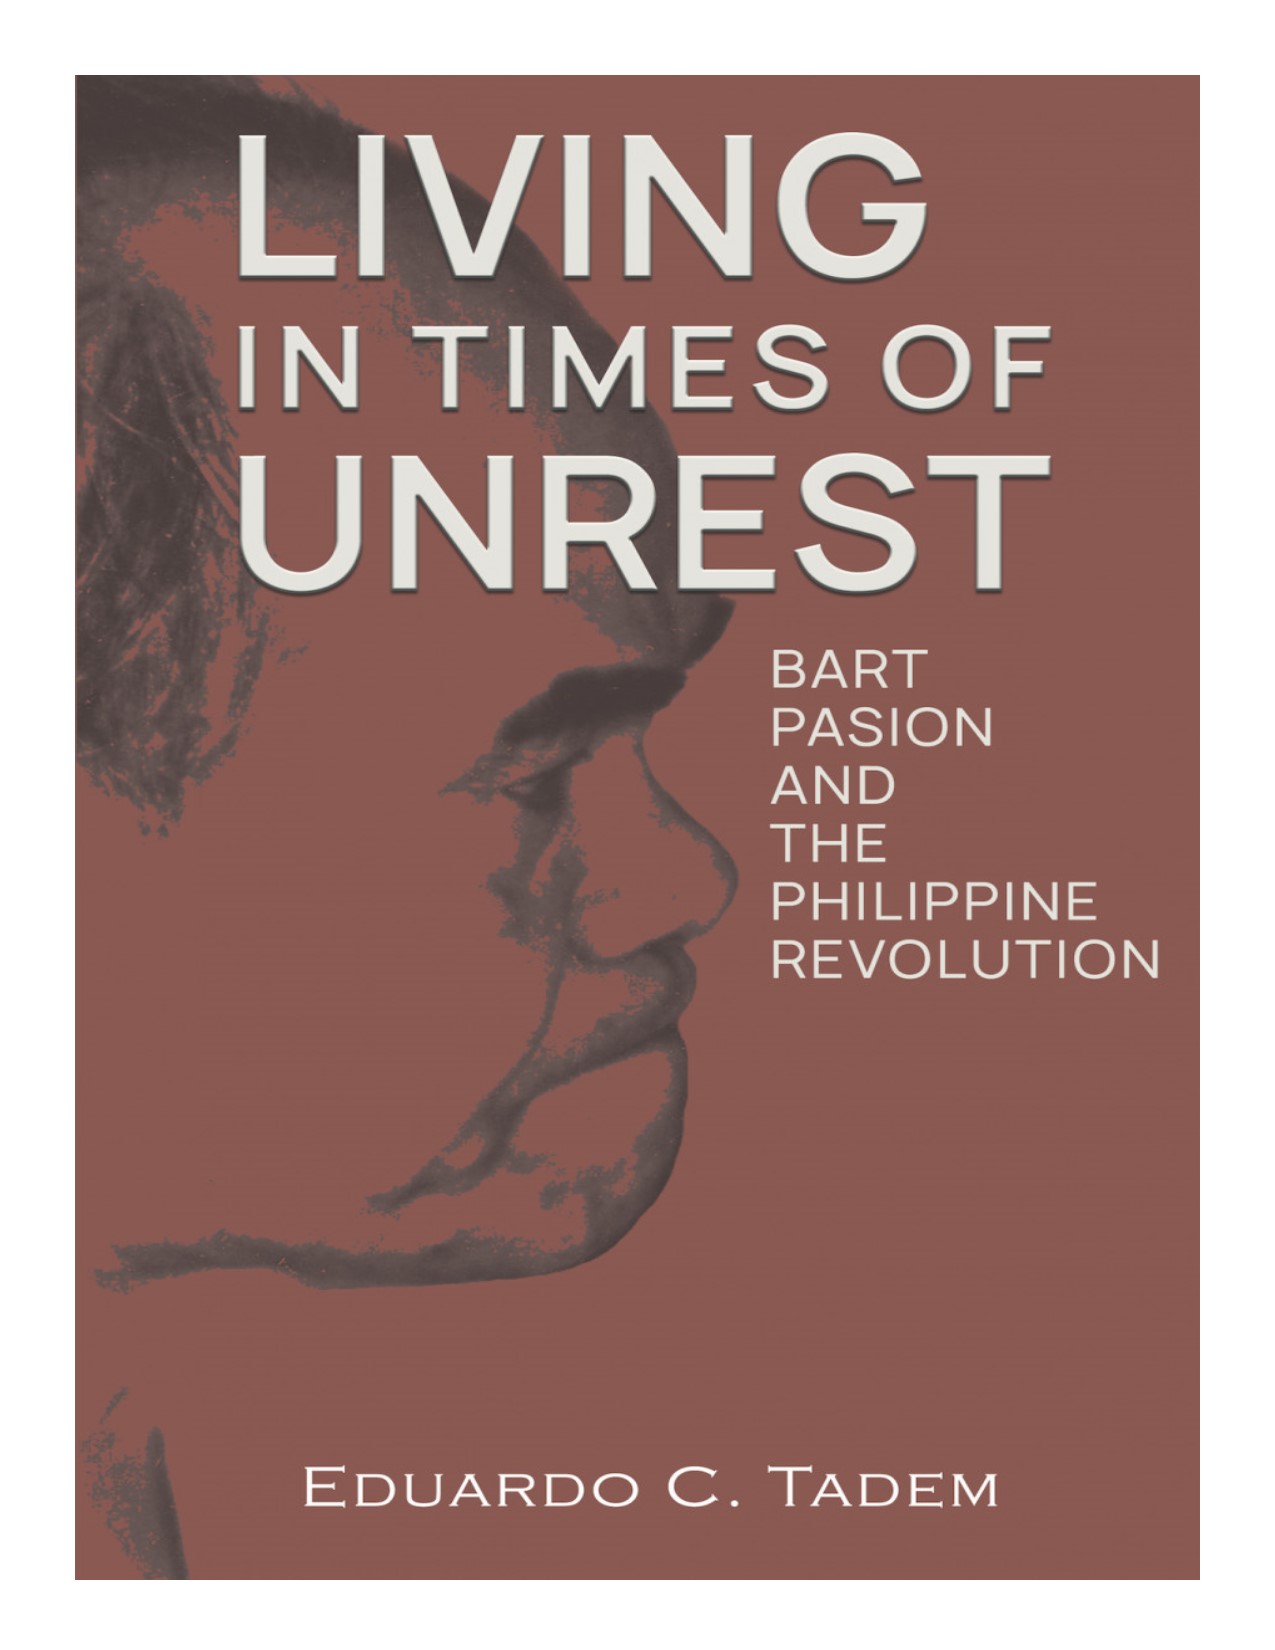 Living in times of unrest Bart Pasion and the Philippine revolution